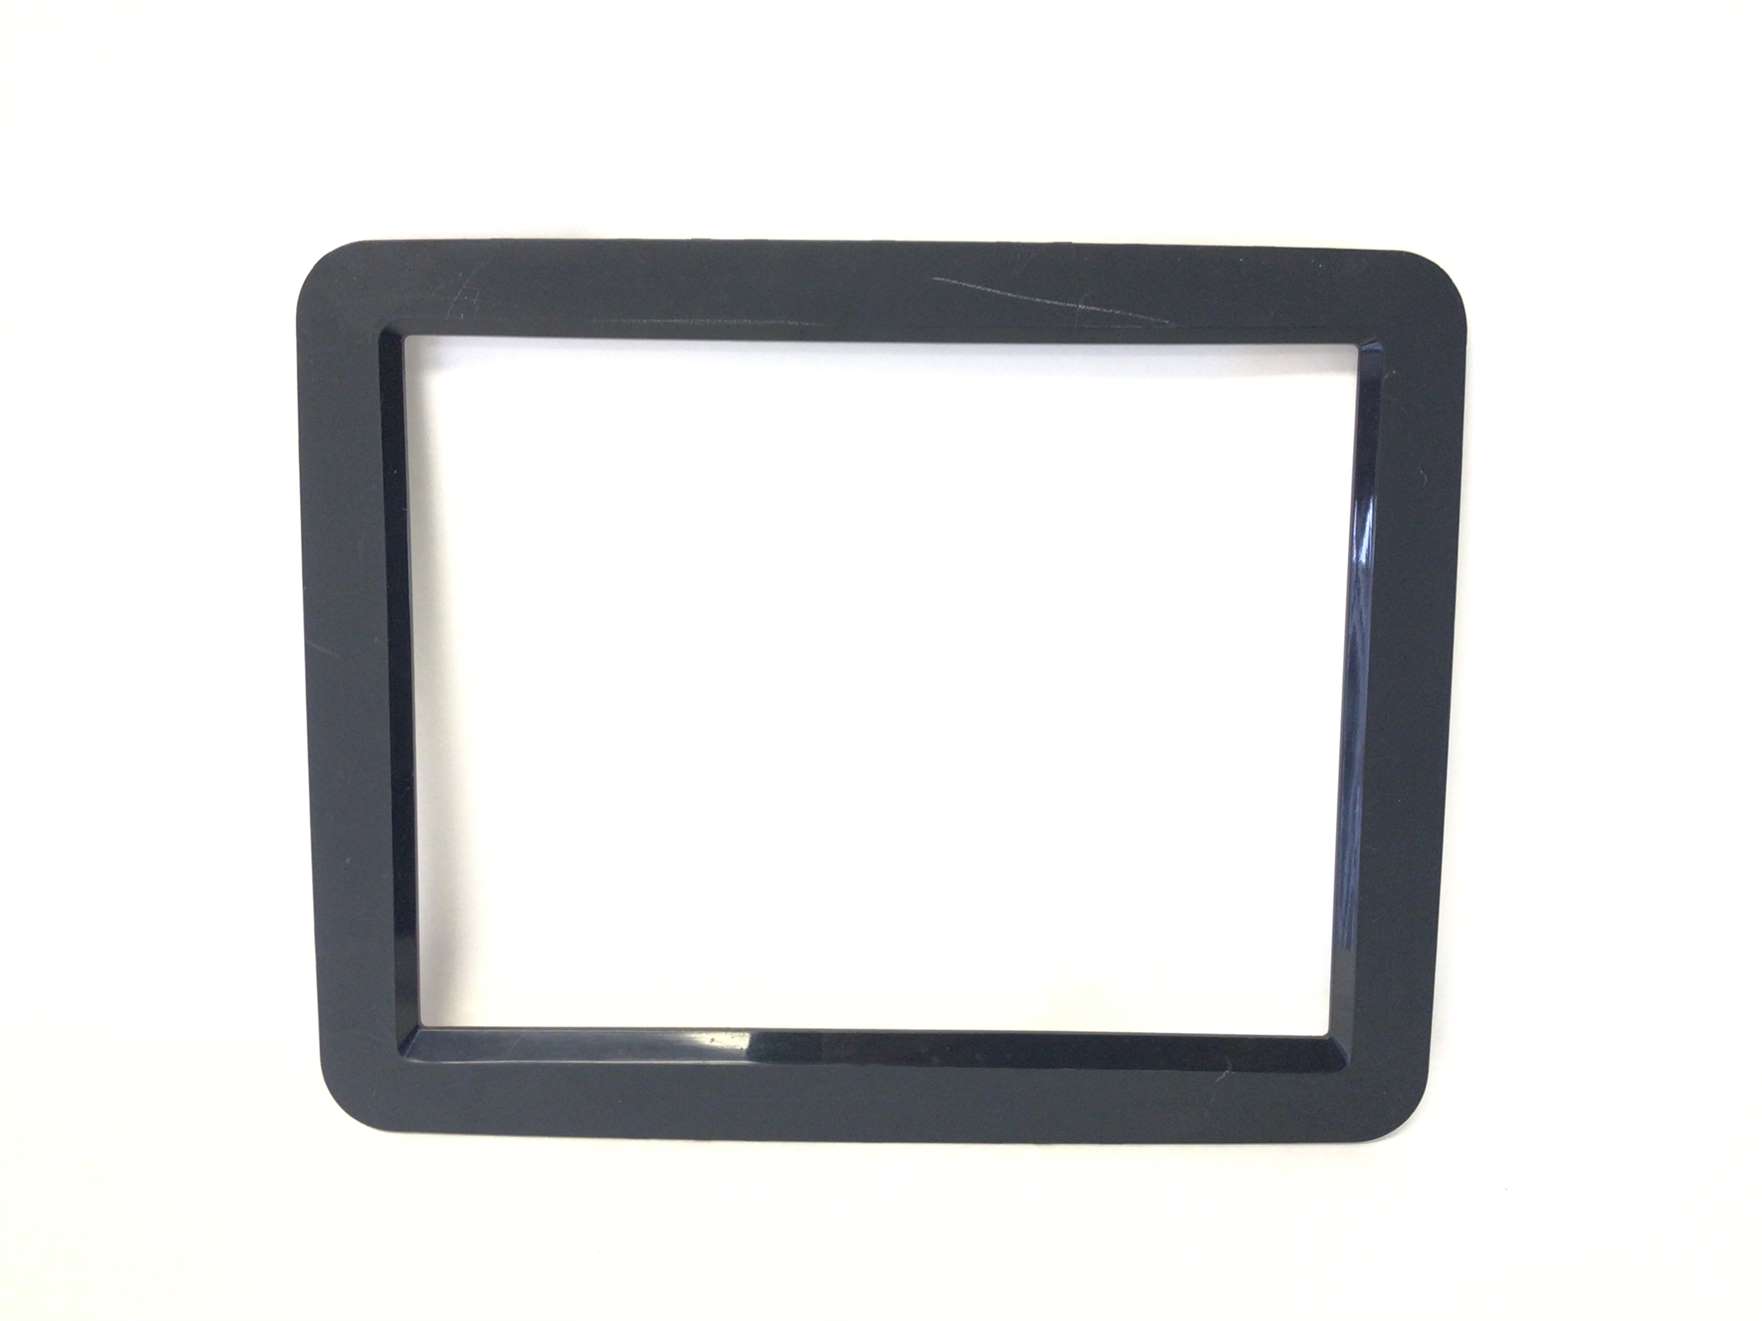 PVS Front Bezel Cover Trim (Used)